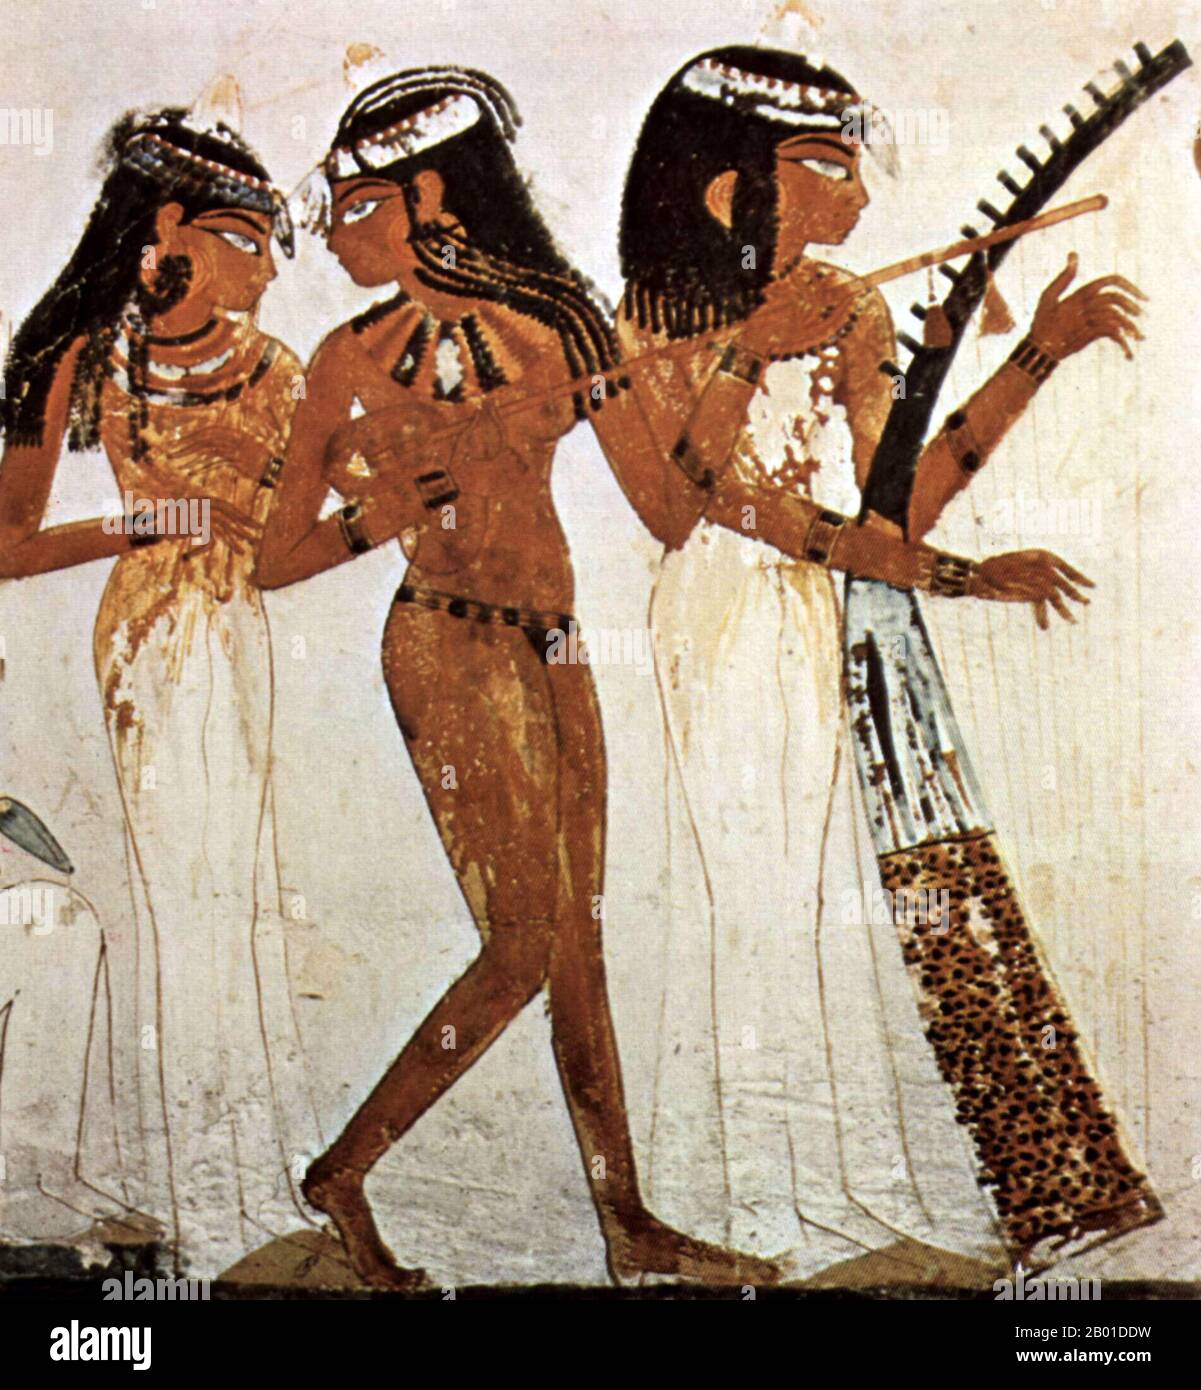 Egypt: Three female musicians, better known as the 'Musicians of Amun', Tomb of Nakht, 18th Dynasty (1422-1411 BCE), Thebes.  The music of Egypt has been an integral part of Egyptian culture since ancient times. The ancient Egyptians credited one of their Gods Thoth with the invention of music, which Osiris in turn used as part of his effort to civilise the world.  The earliest material and representational evidence of Egyptian musical instruments dates to the Predynastic period, but the evidence is more securely attested in the Old Kingdom when harps, flutes and double clarinets were played. Stock Photo